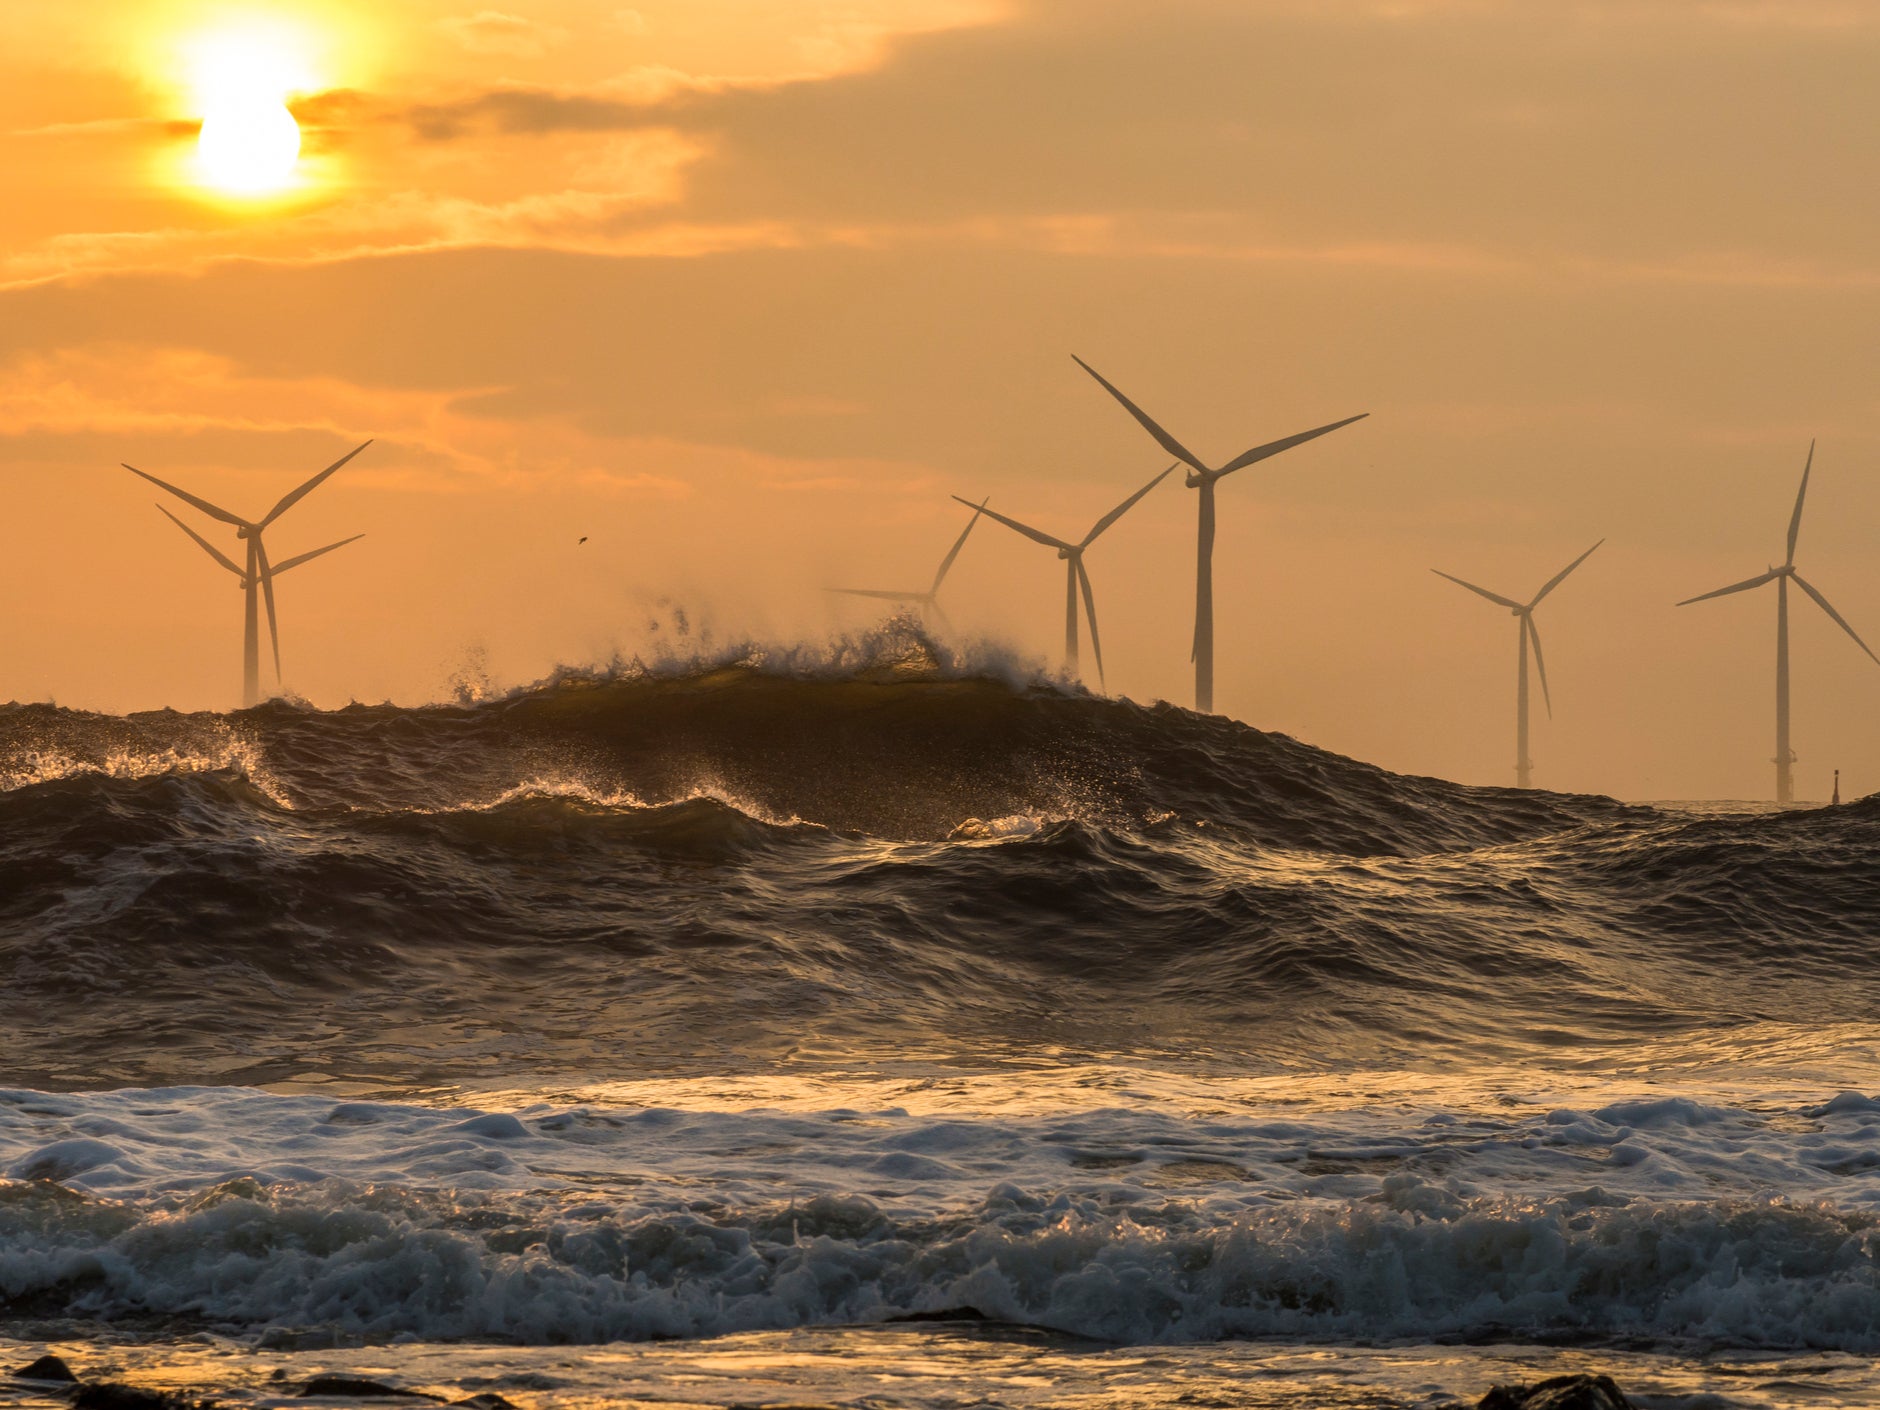 Storm Bella saw yet another record broken for wind power generation